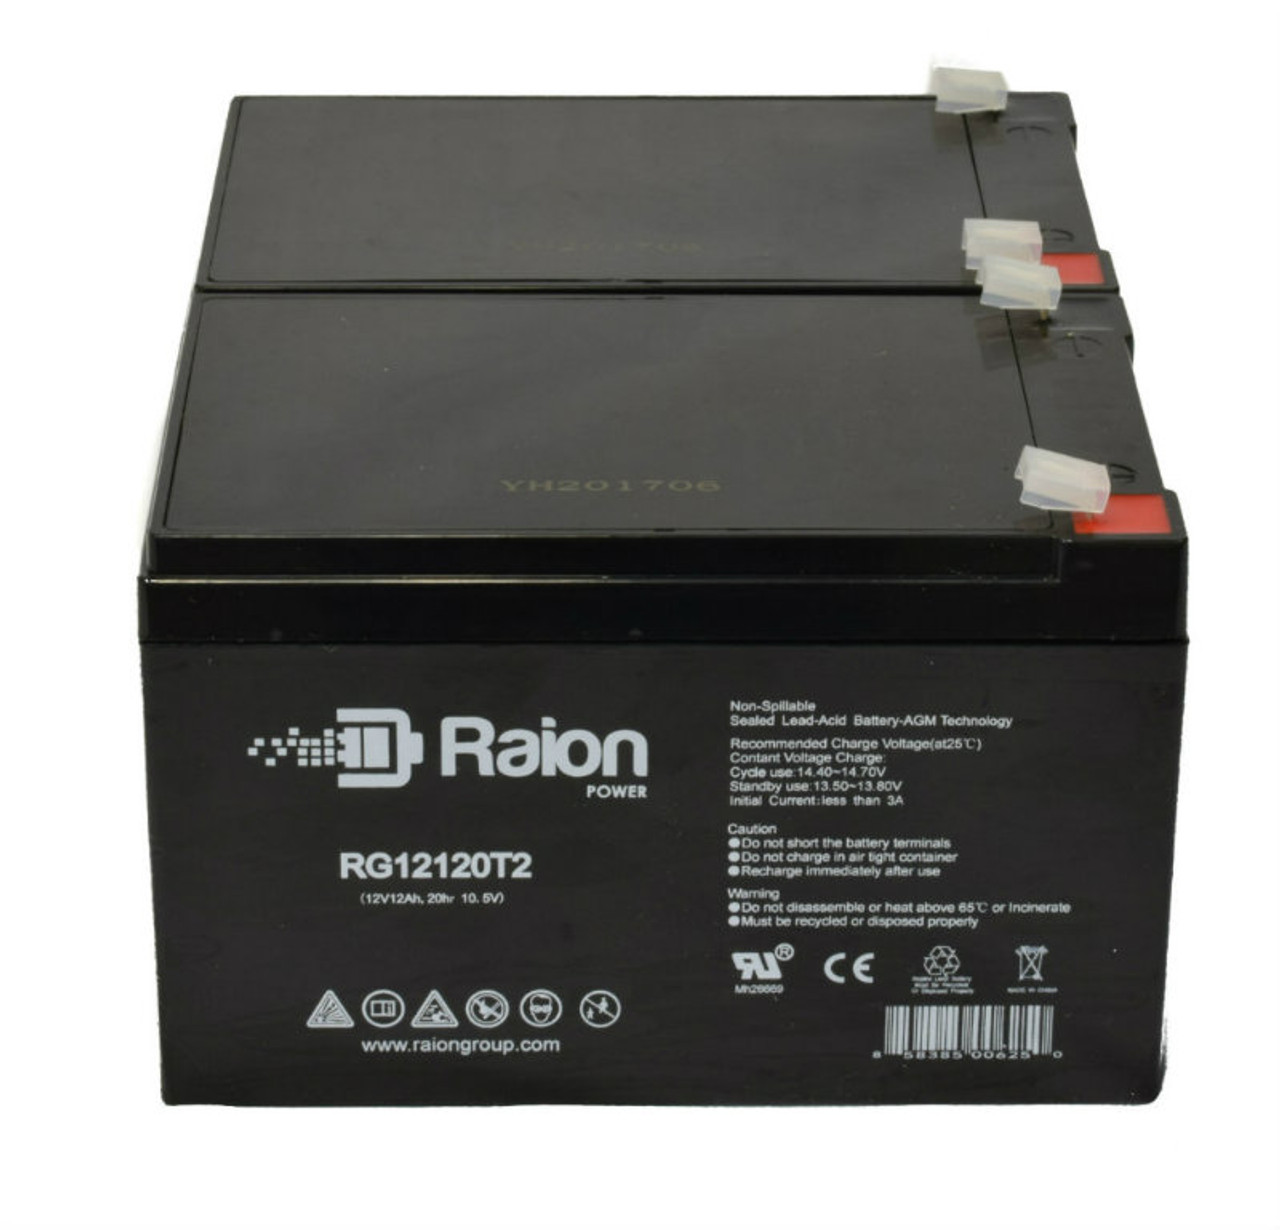 Raion Power RG12120T2 Replacement Fire Alarm Control Panel Battery for Altronix AL1012ULX - 2 Pack